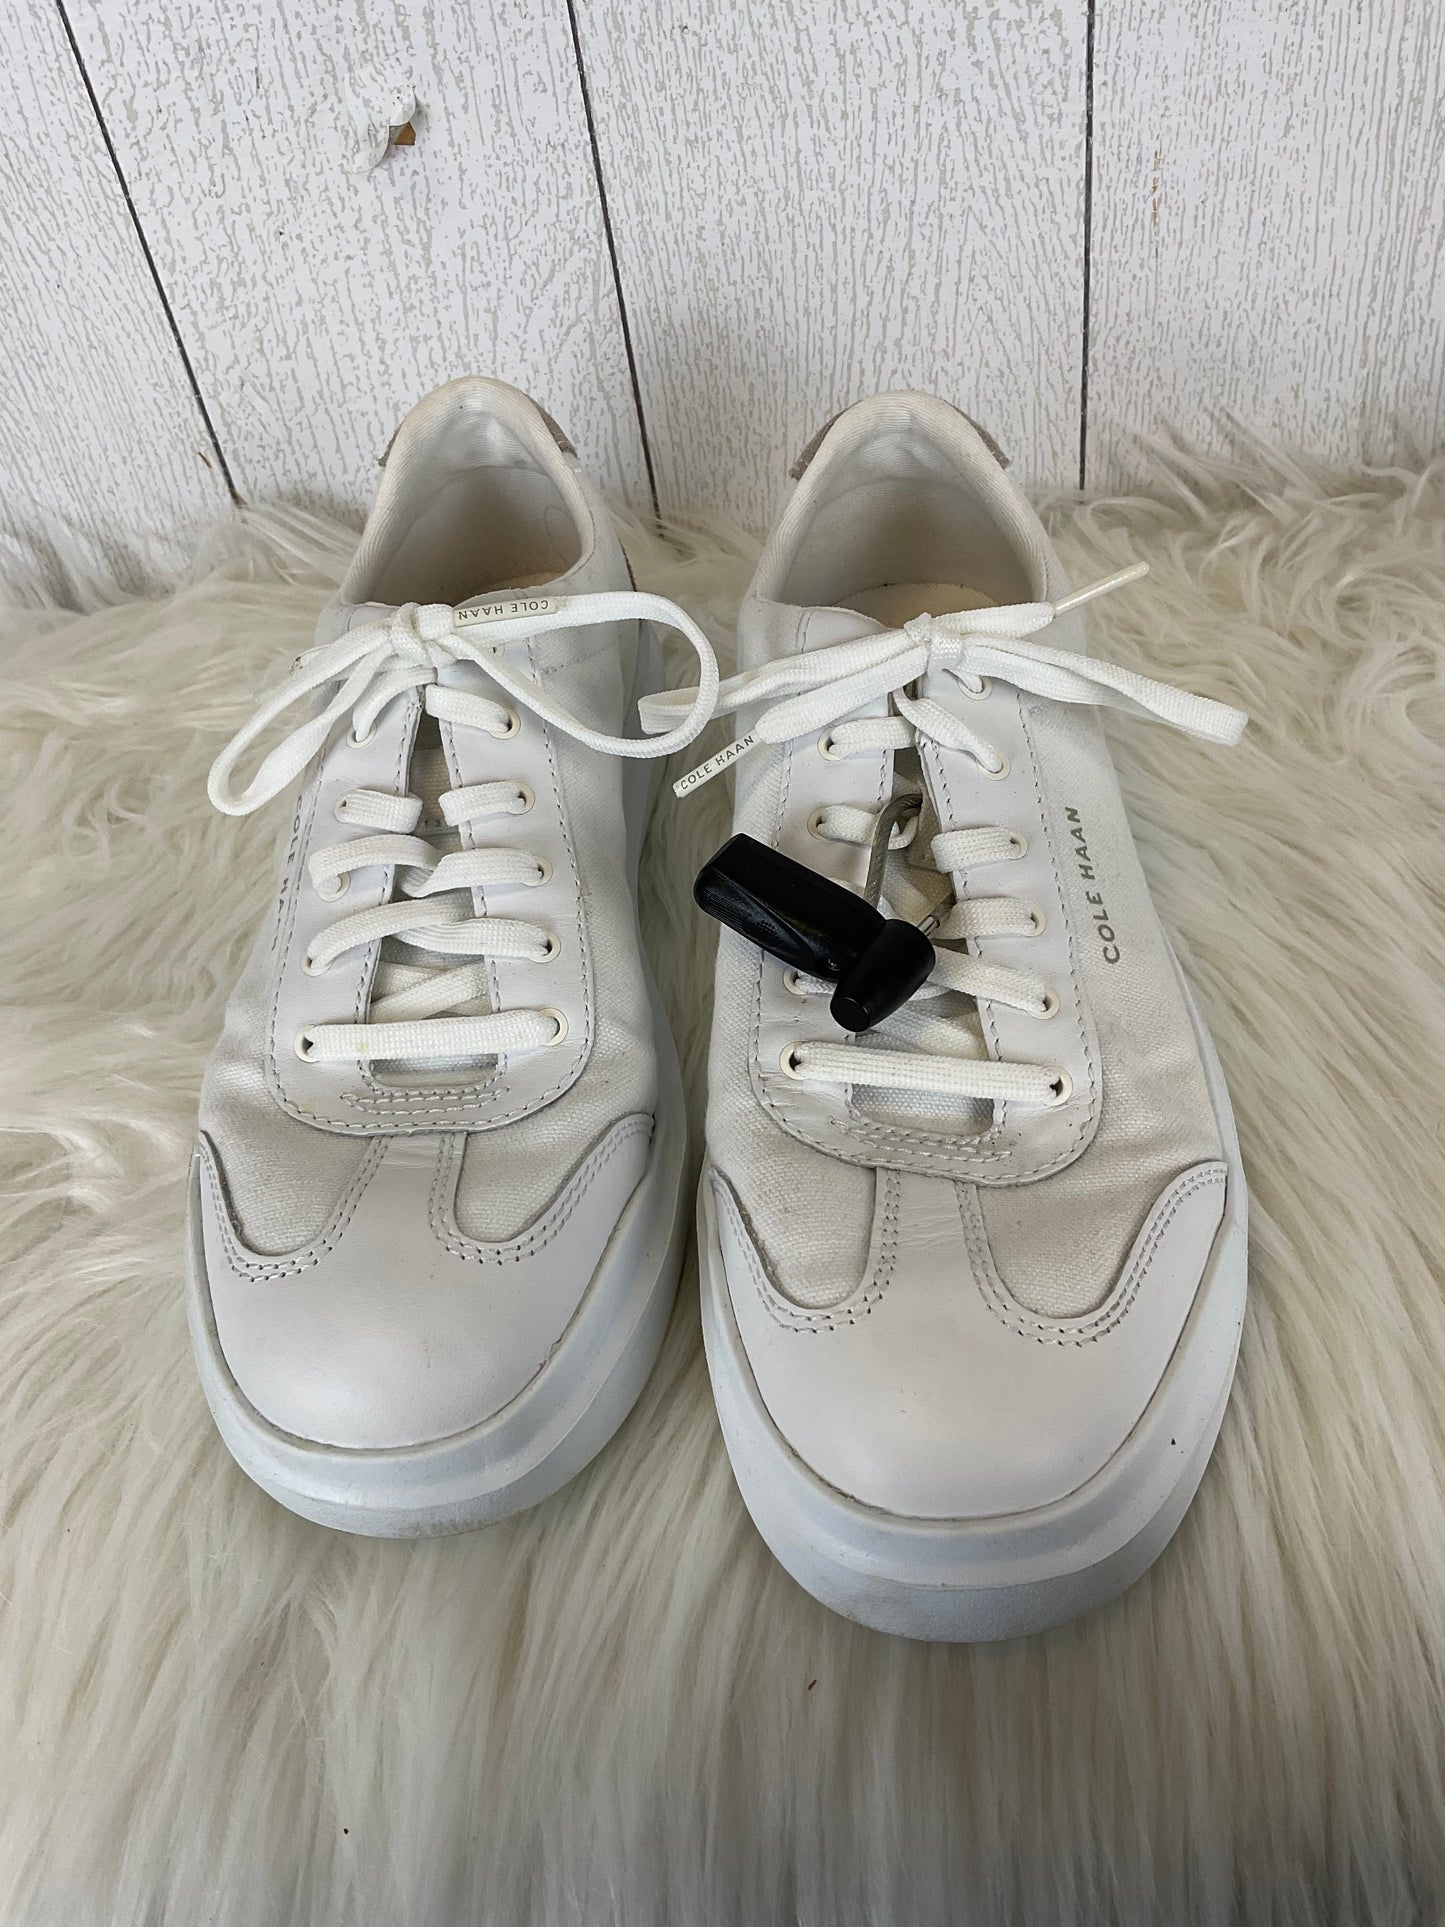 White Shoes Sneakers Cole-haan, Size 9